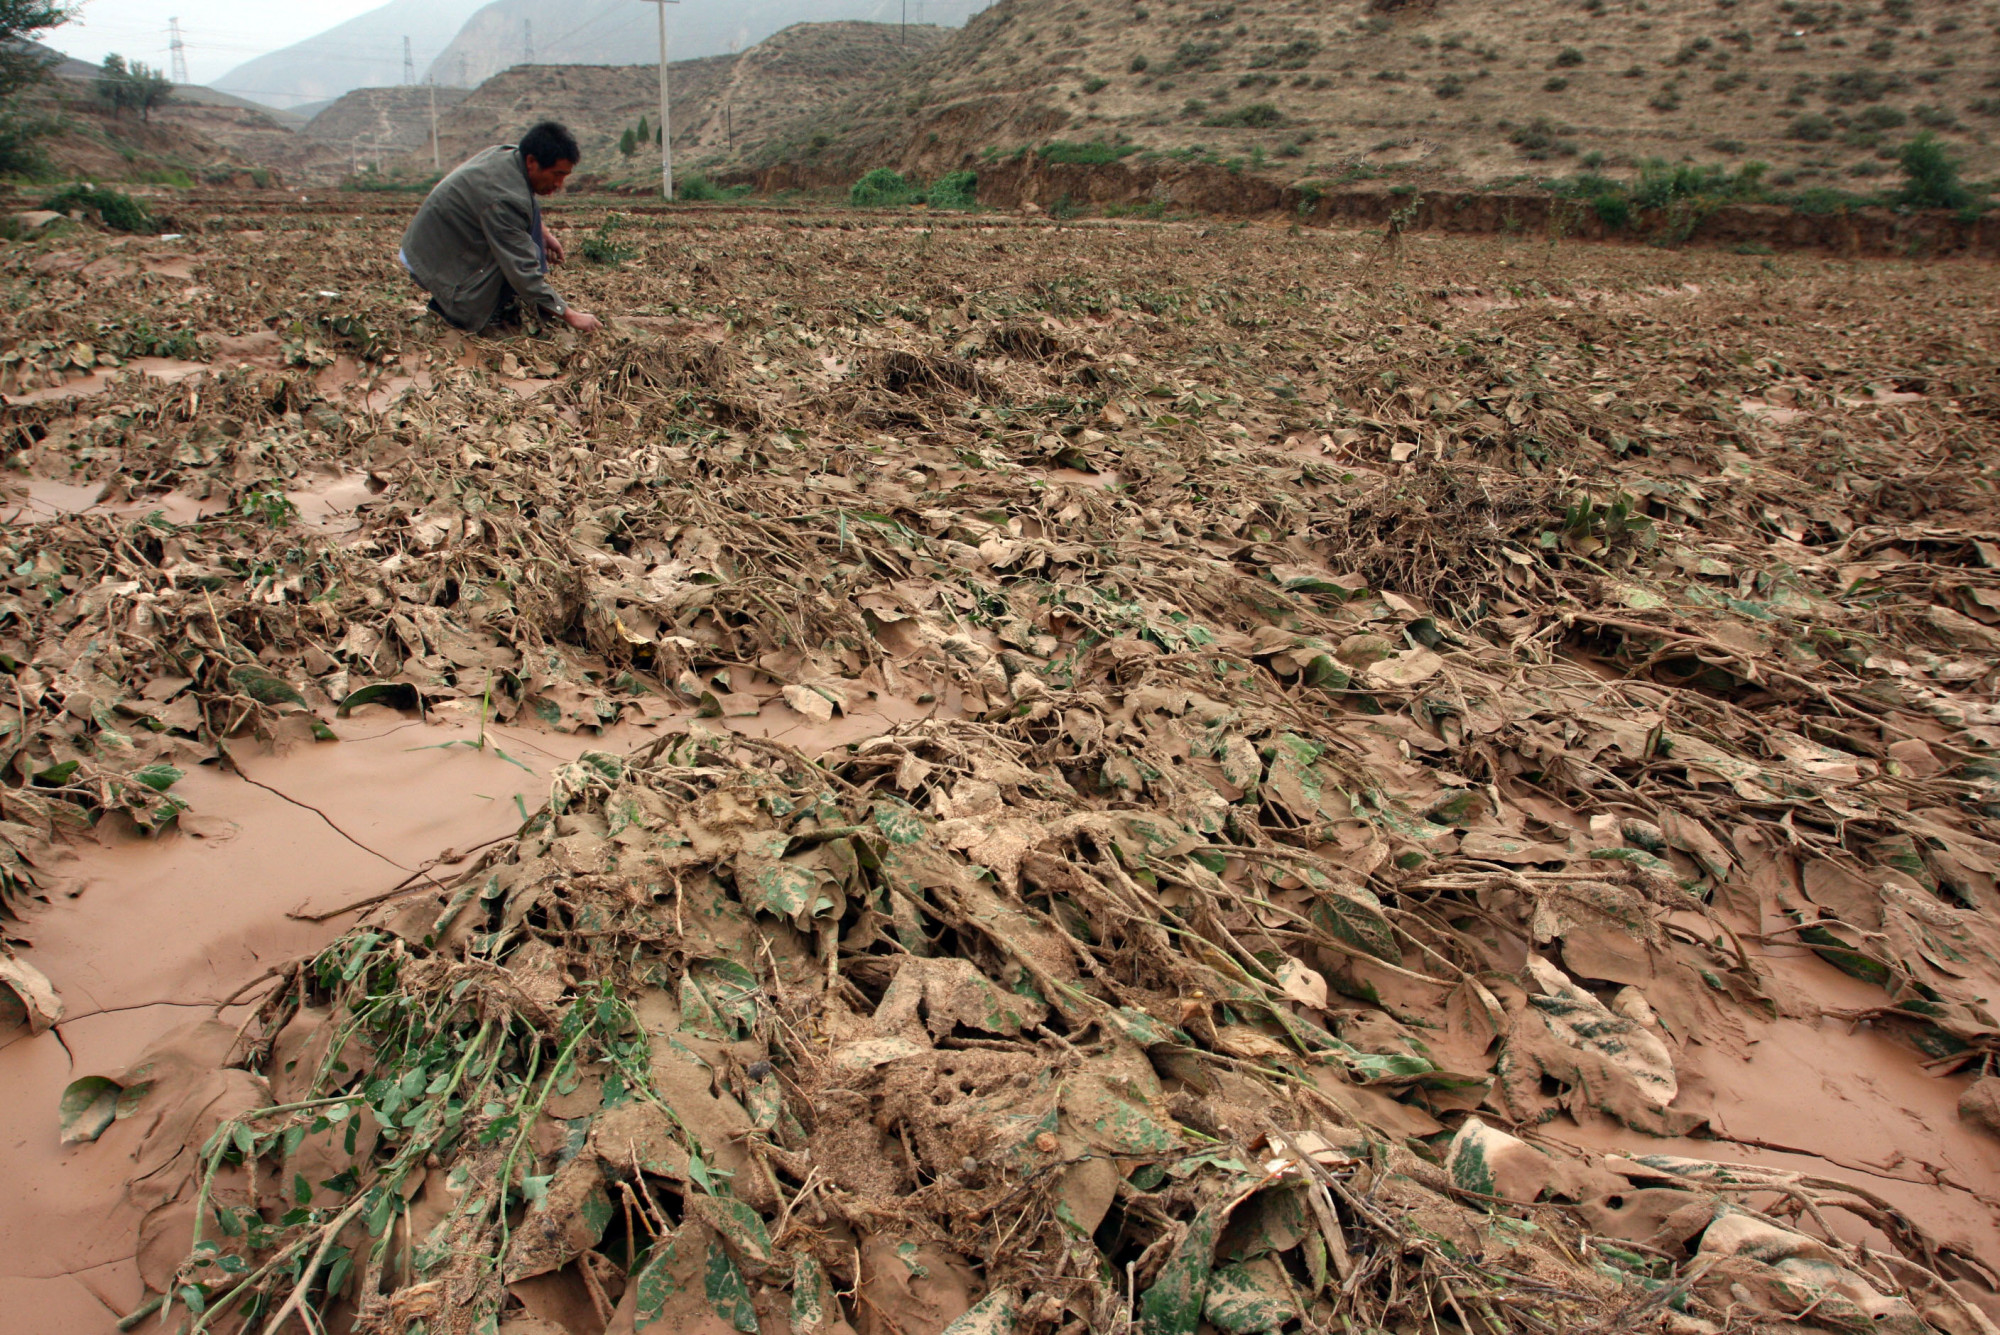 China Faces Food Shortage as Droughts, Flooding, and Pests Ruin Harvest